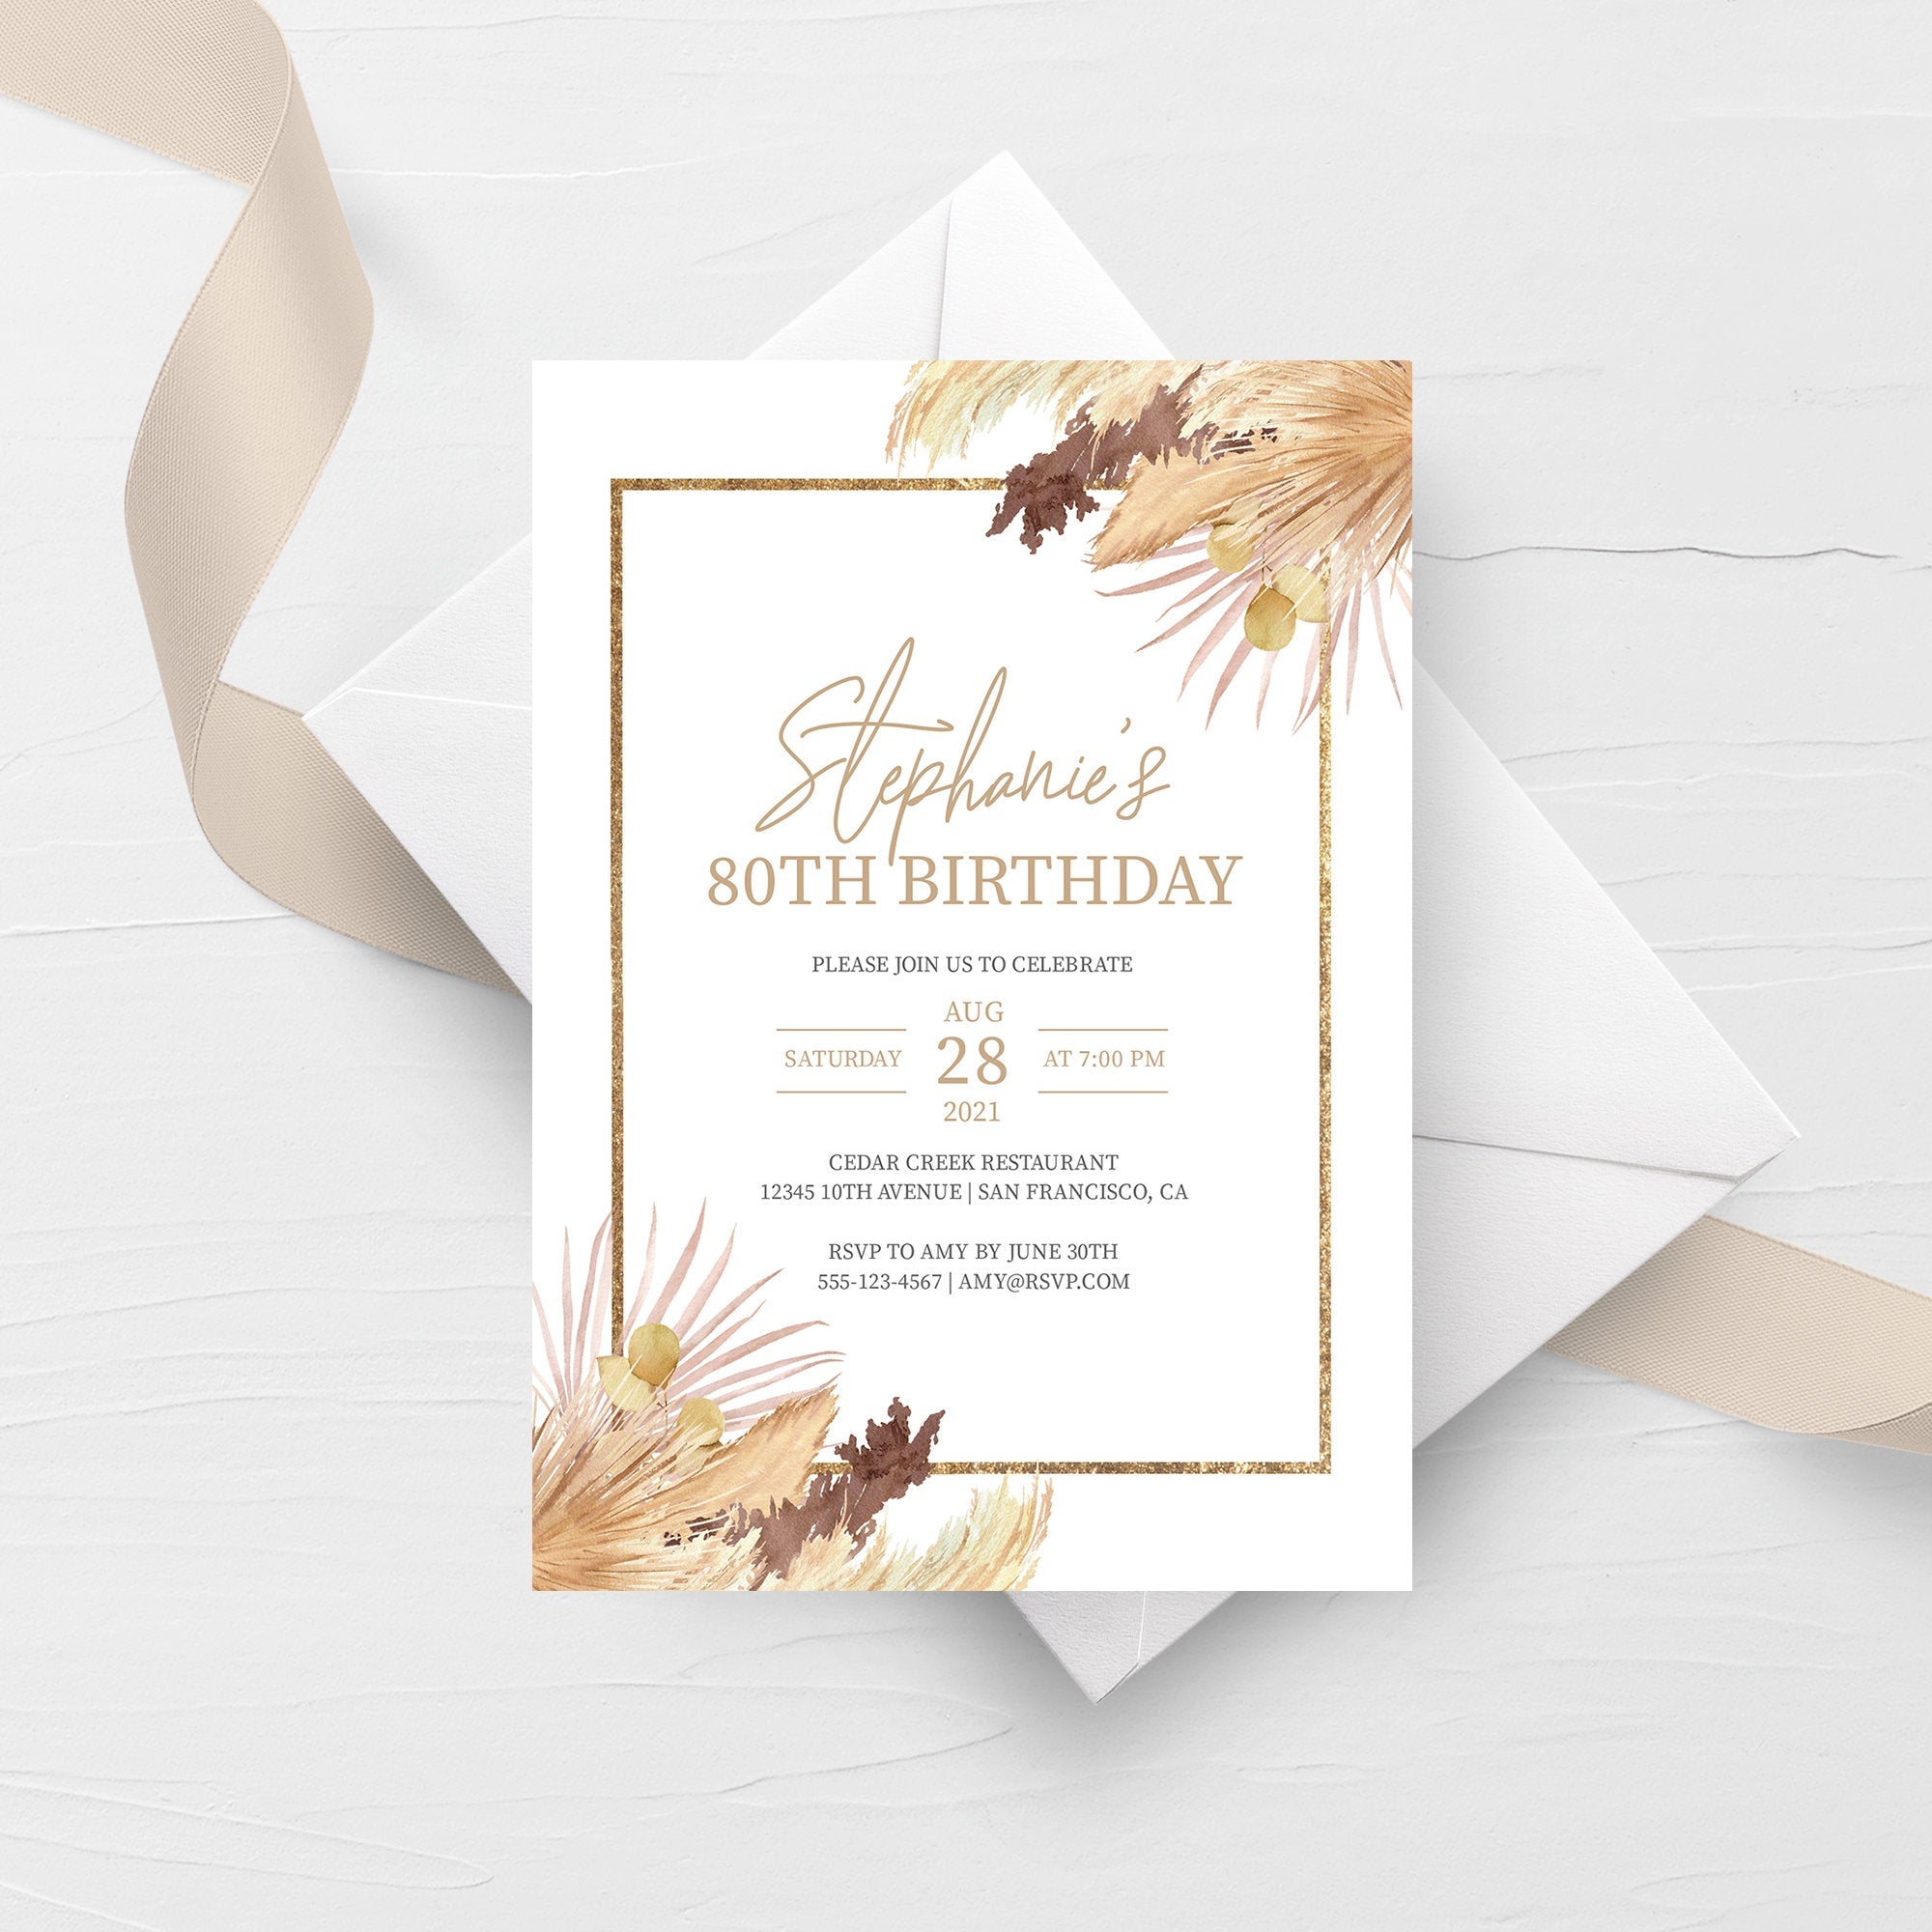 Pampas 80th Birthday Invitations, Printable 80th Birthday Party Invitation, Desert Bohemian 80th Birthday Invites, INSTANT DOWNLOAD DP100